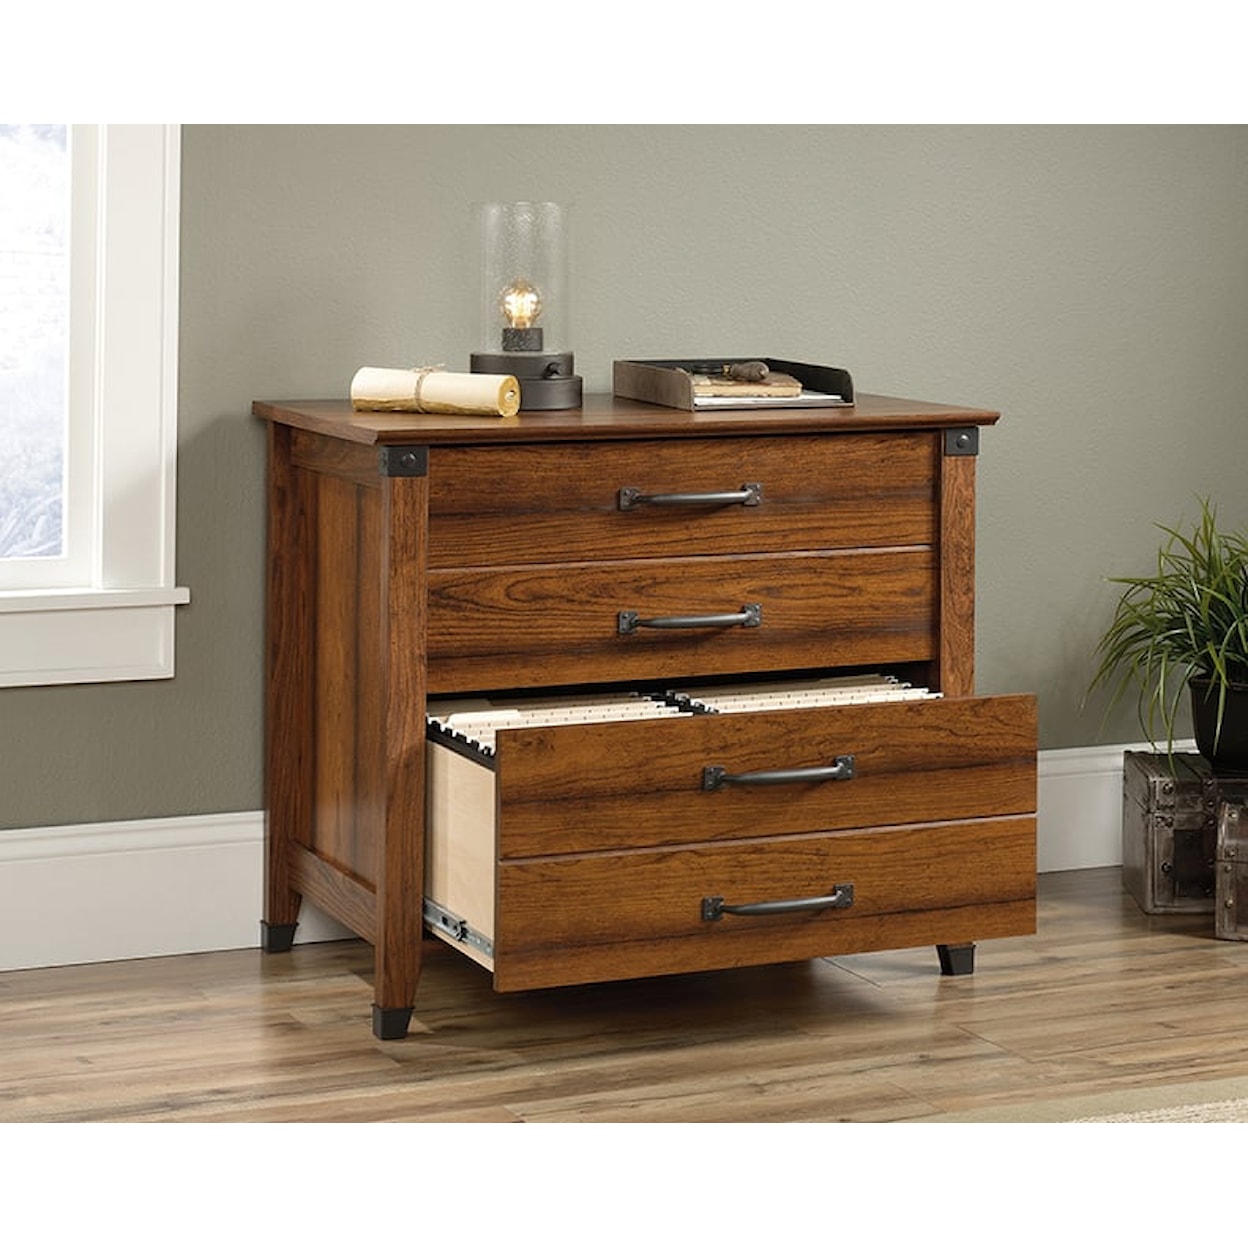 Sauder Carson Forge 2-Drawer Lateral File Cabinet